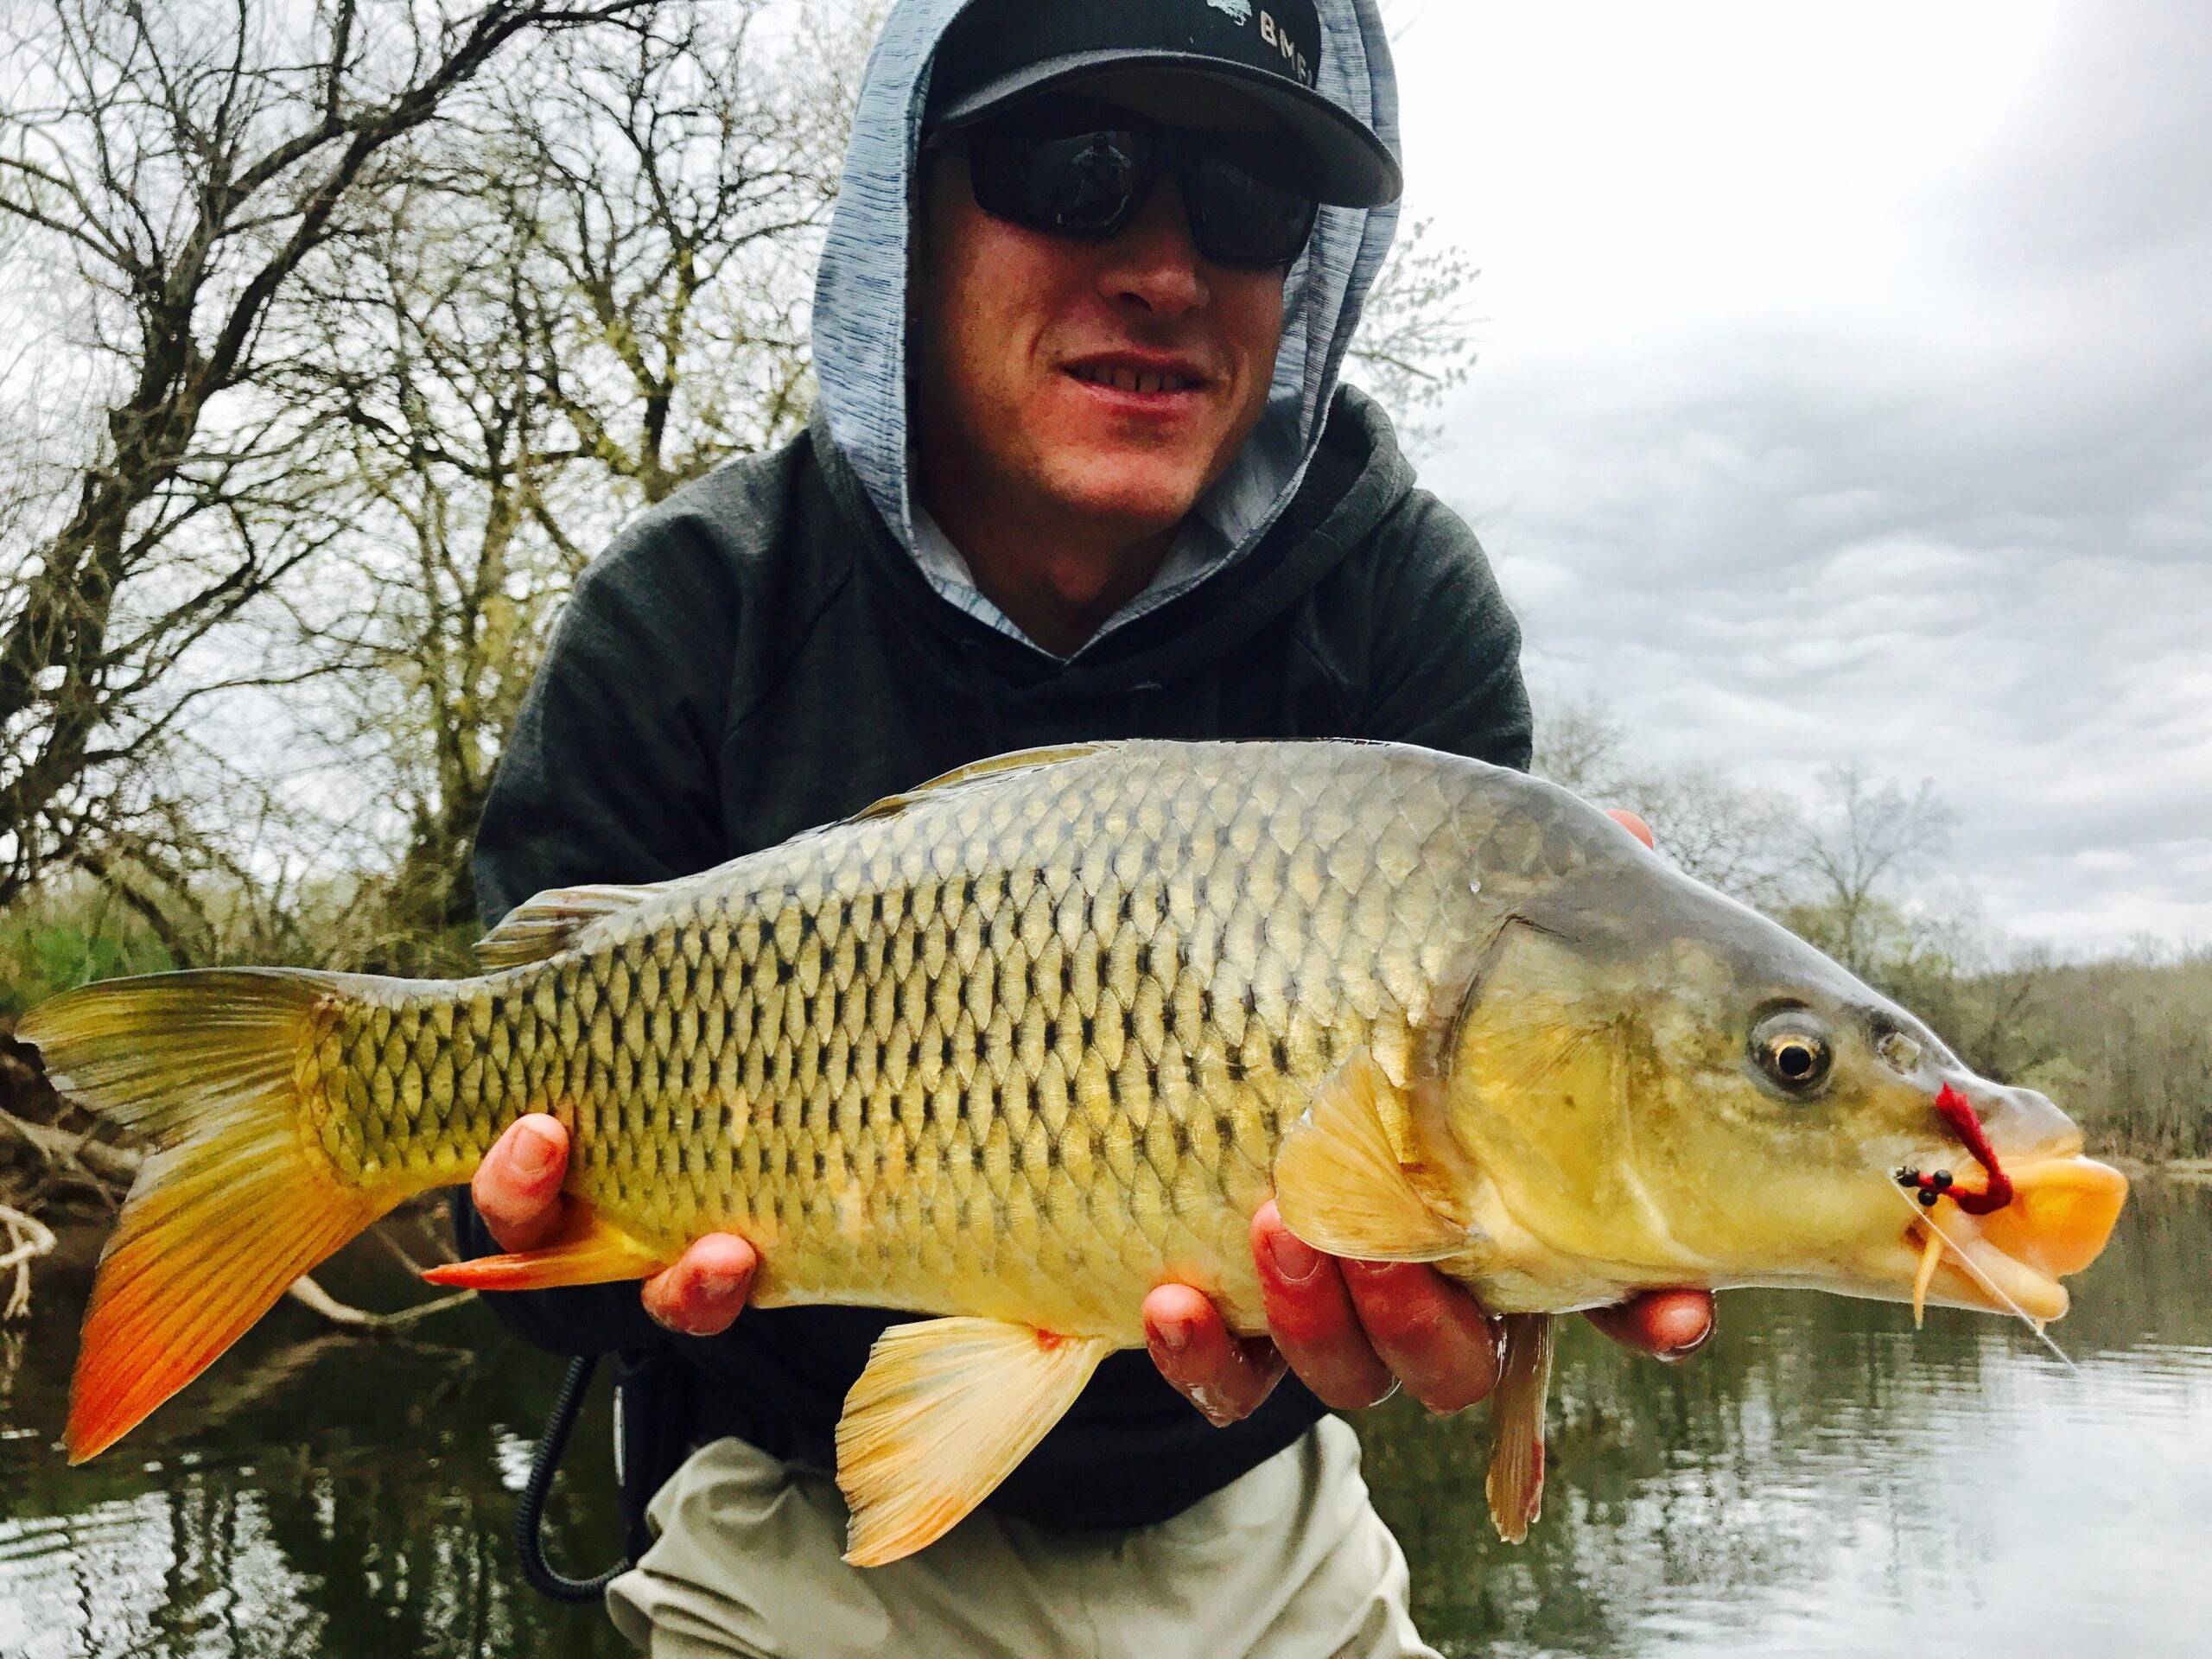 fly angler with a carp caught on a worm fly